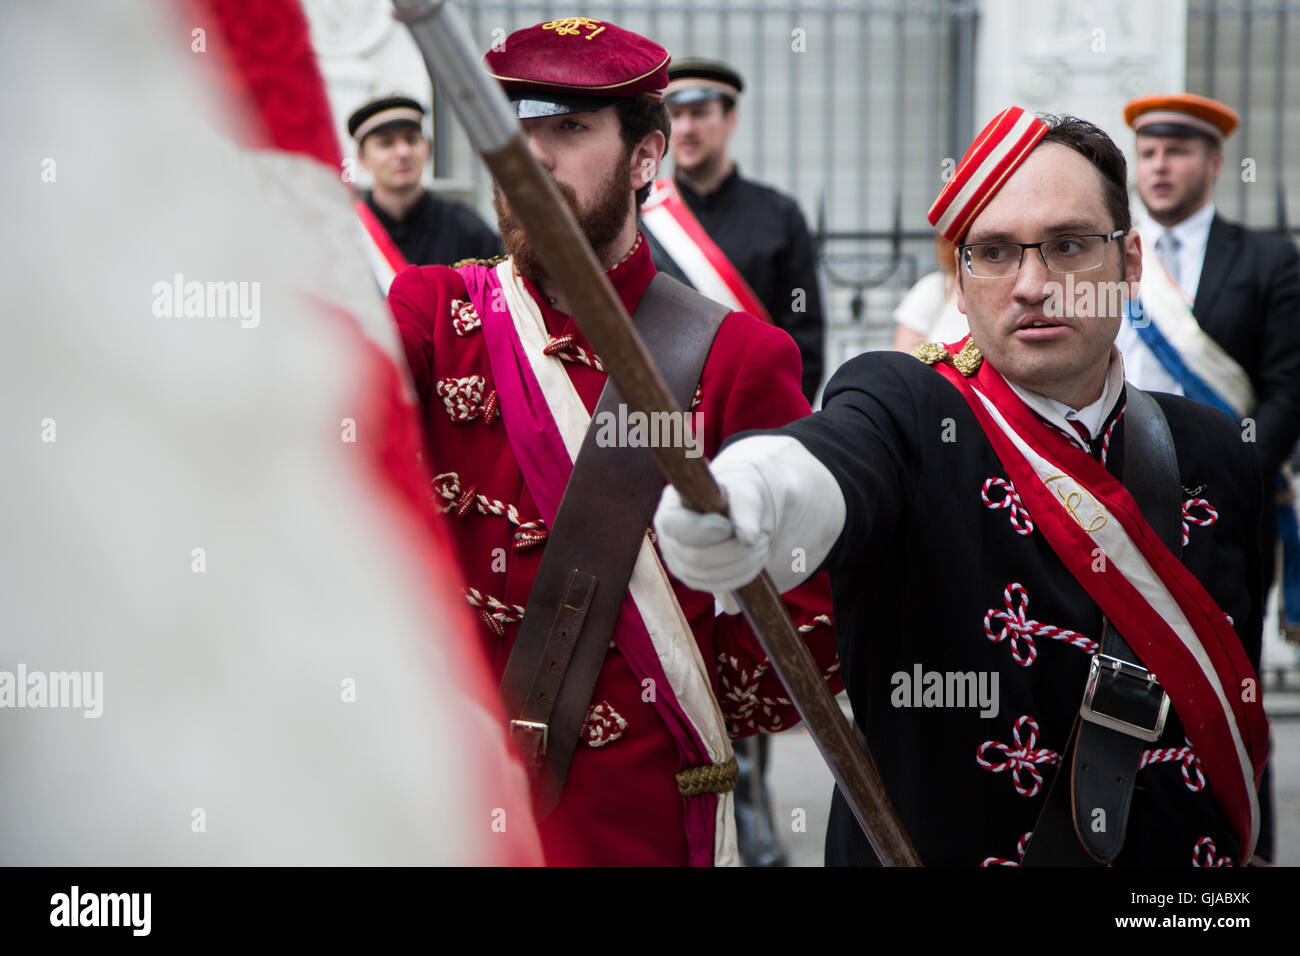 Flag bearers wear traditional dress at a ceremony in Zurich in celebration of Swiss National Day. Stock Photo